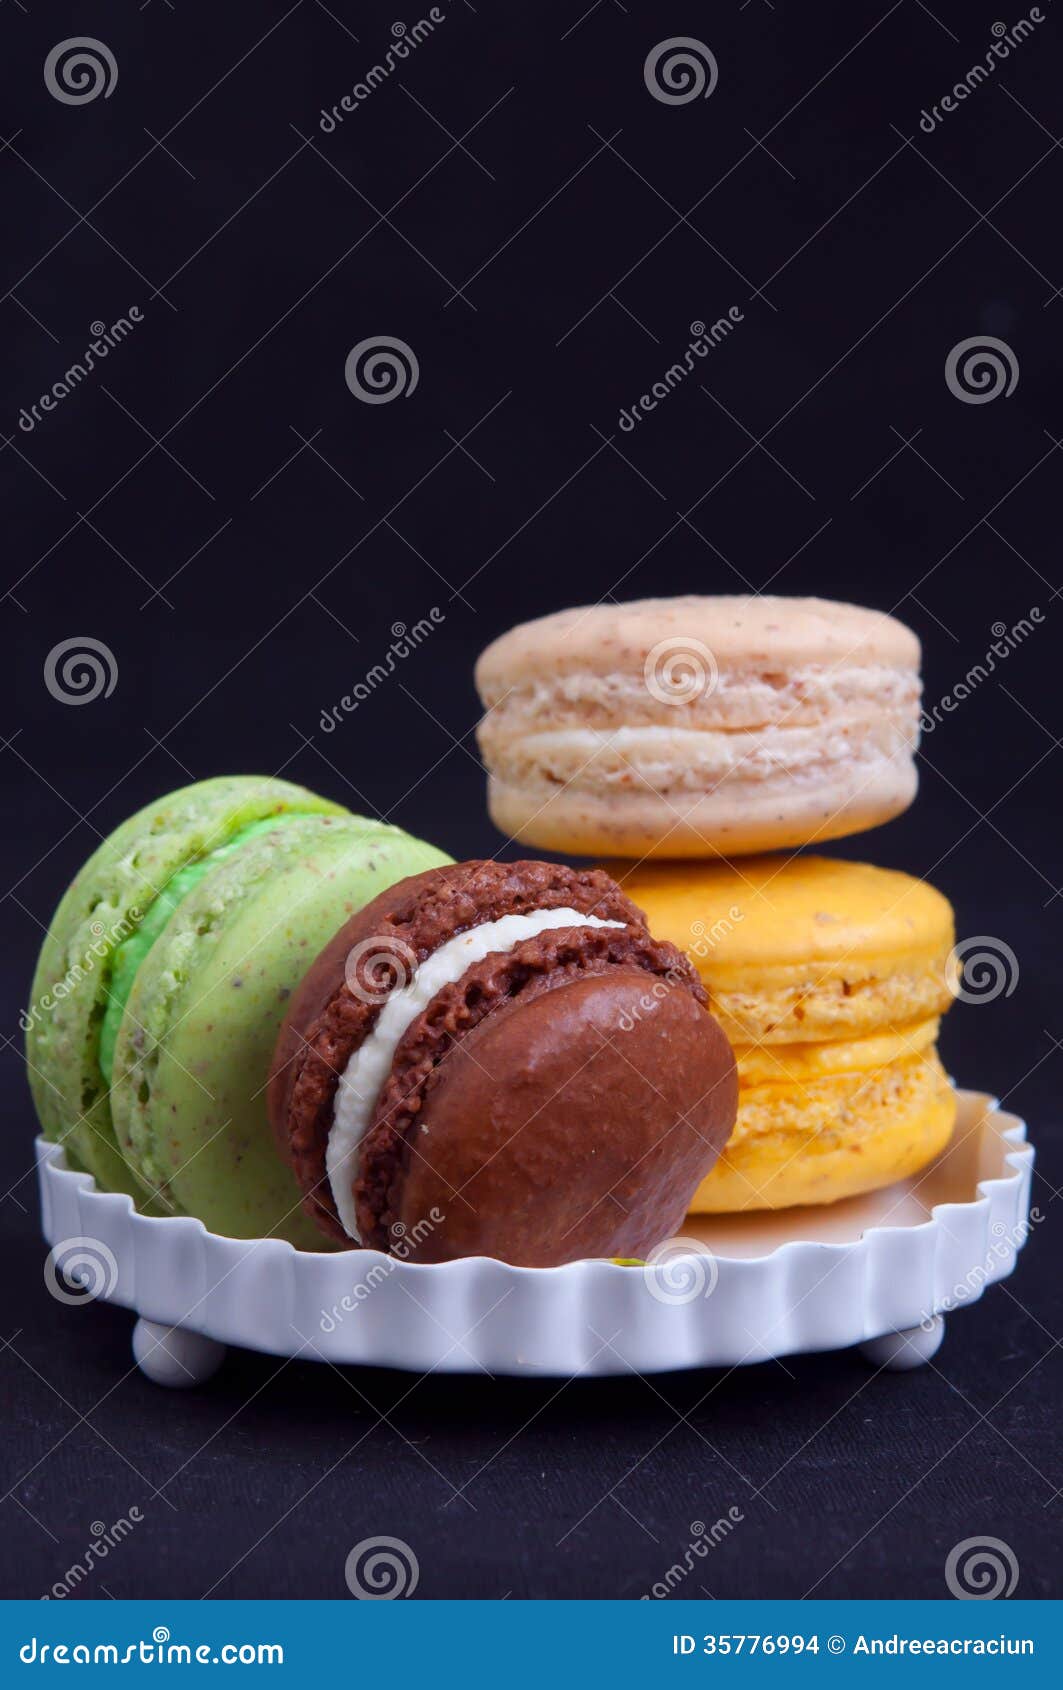 French macarons on plate stock photo. Image of coffee - 35776994